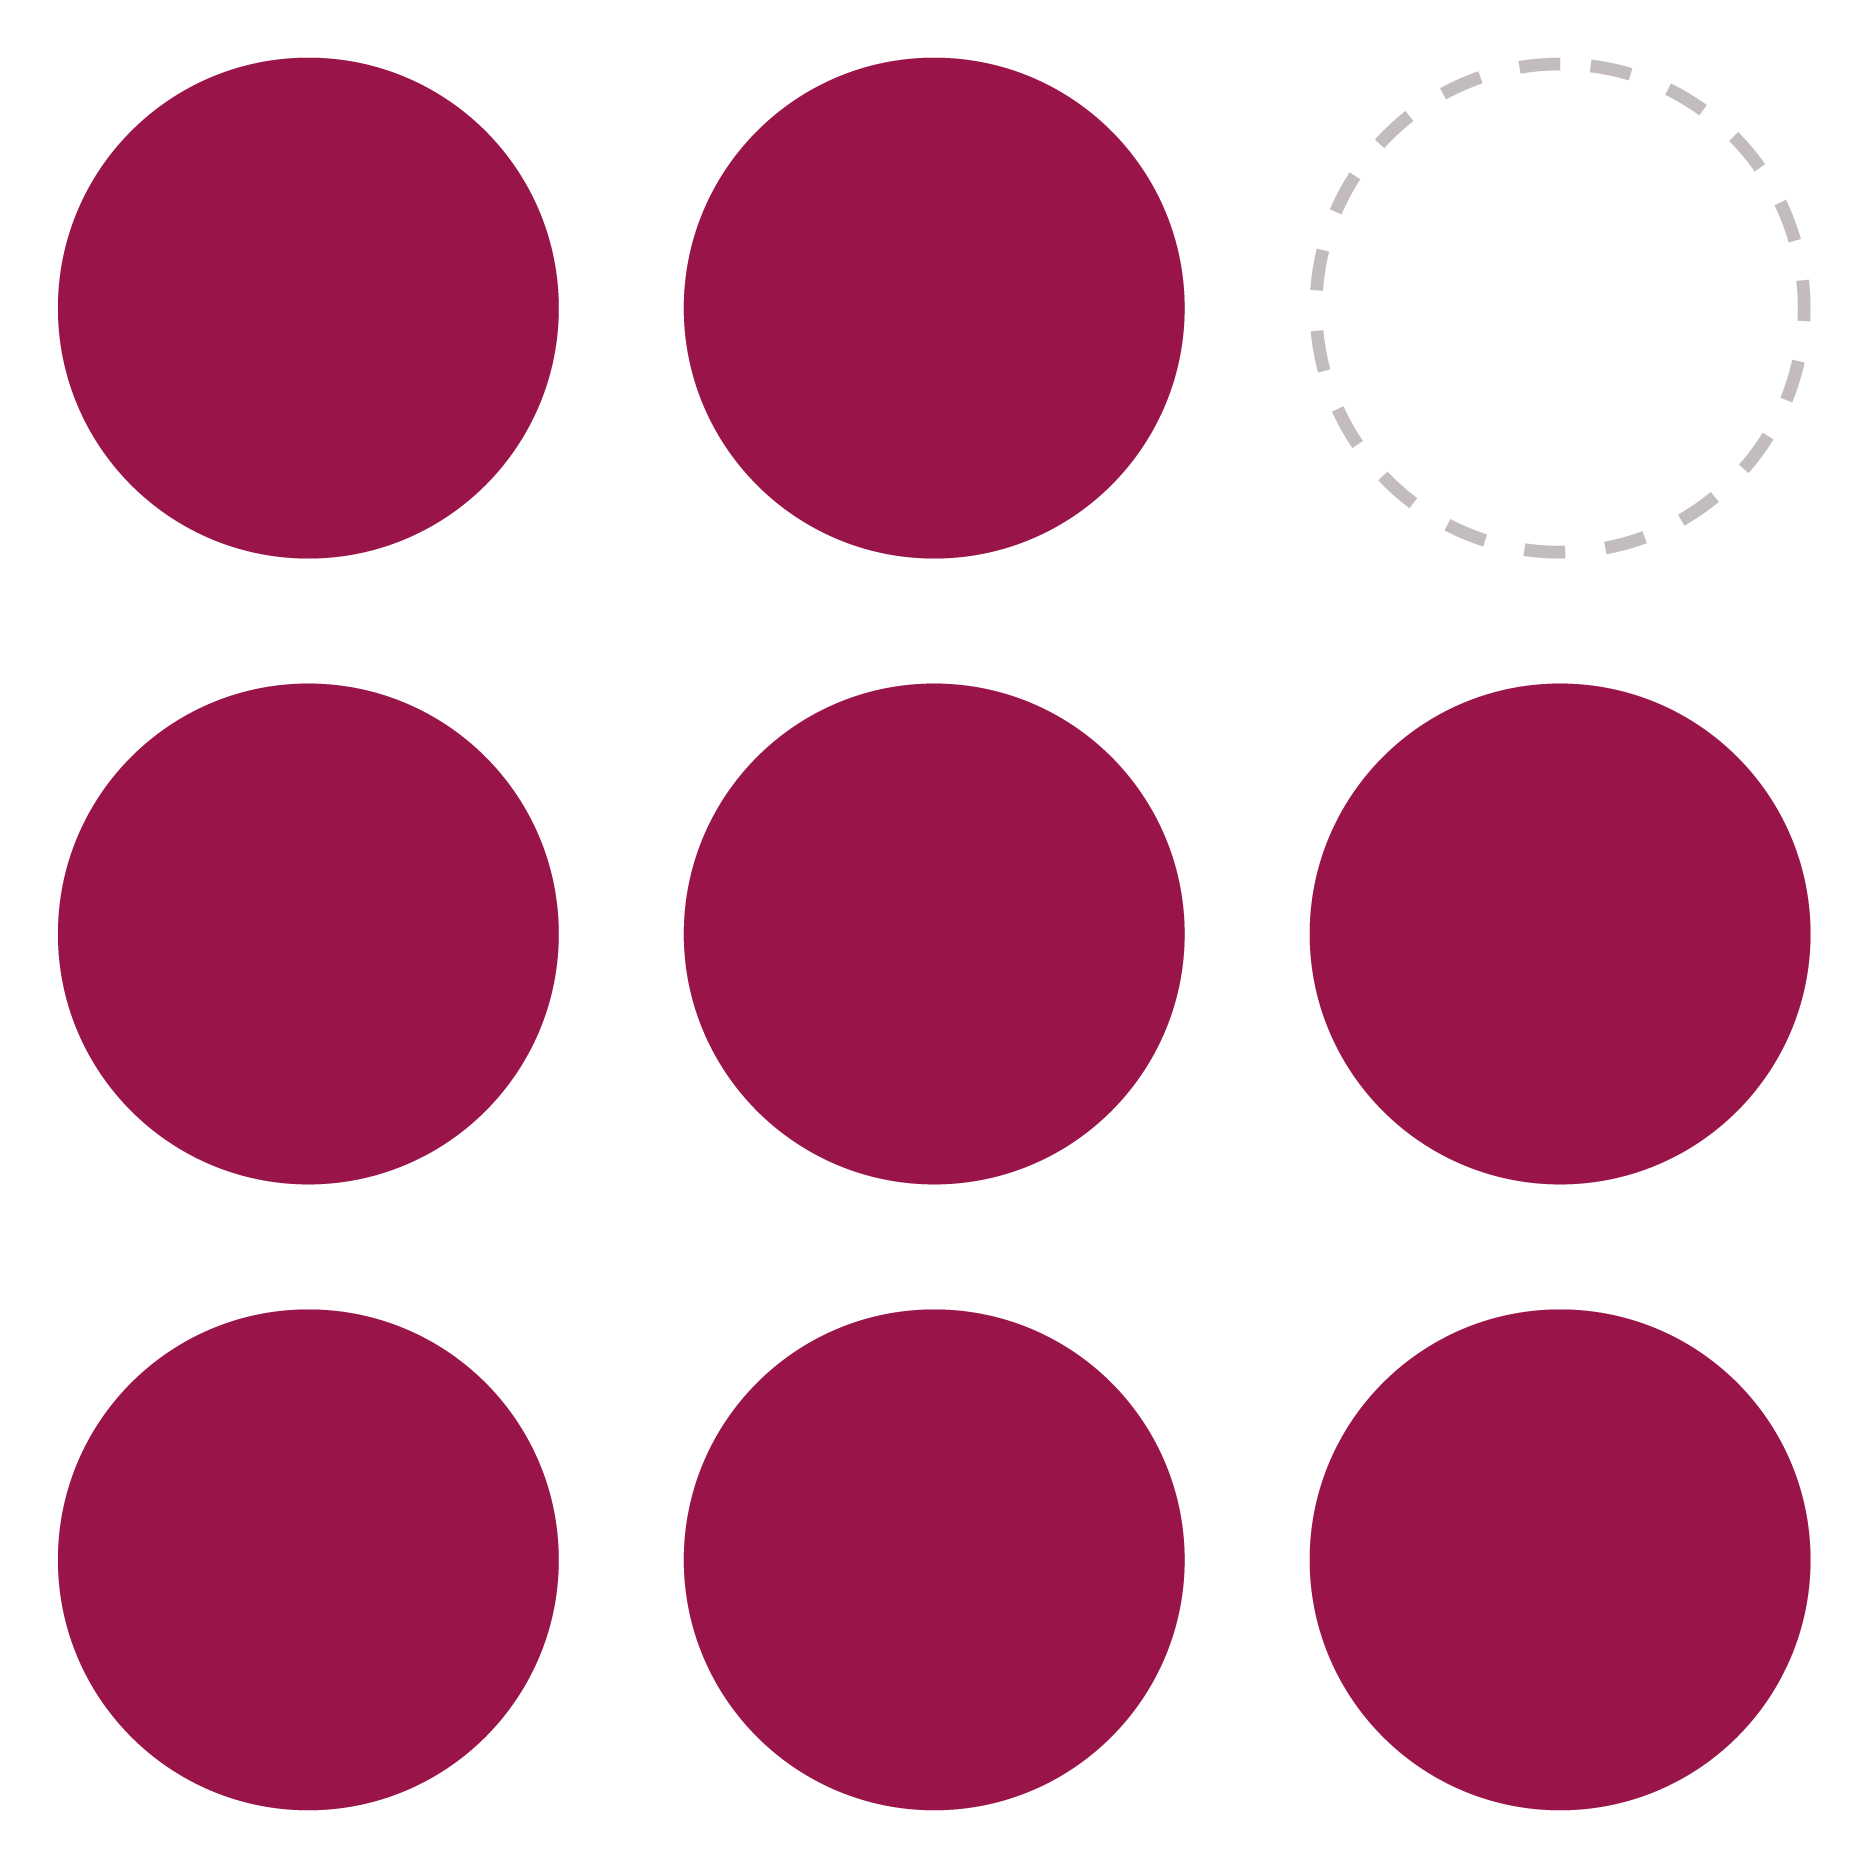 3 by 3 arrangement of circles on a pick background. 8 circles are colored red. 1 is empty with a gray dashed outline.